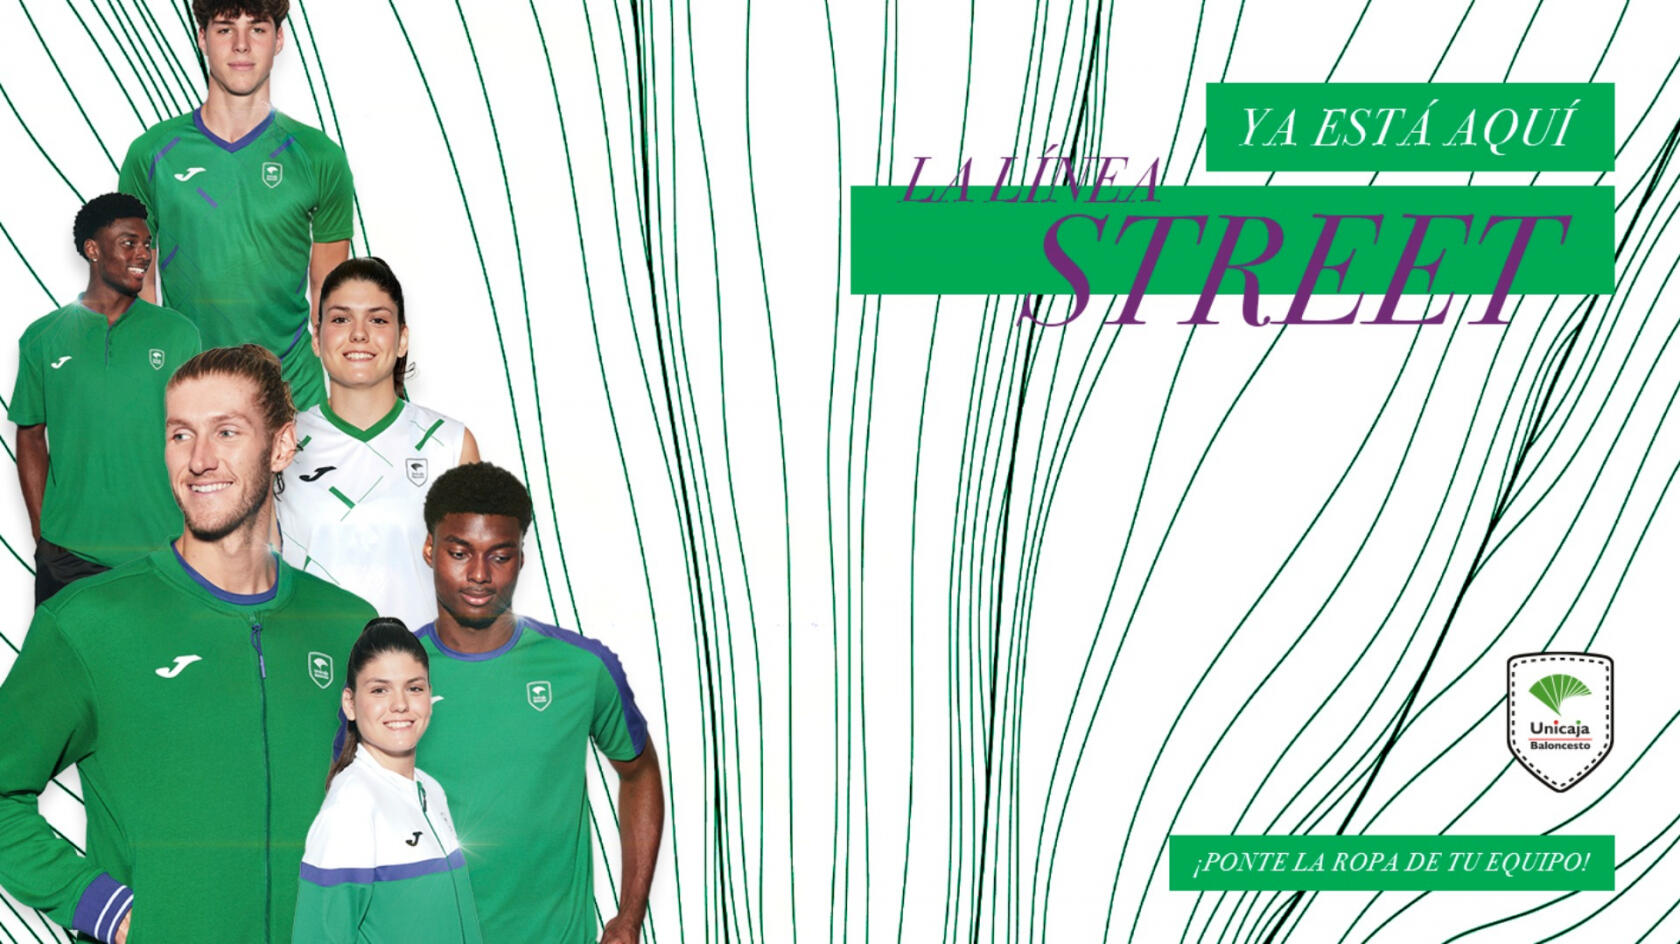 Update your look with the new Street line from Unicaja Baloncesto!